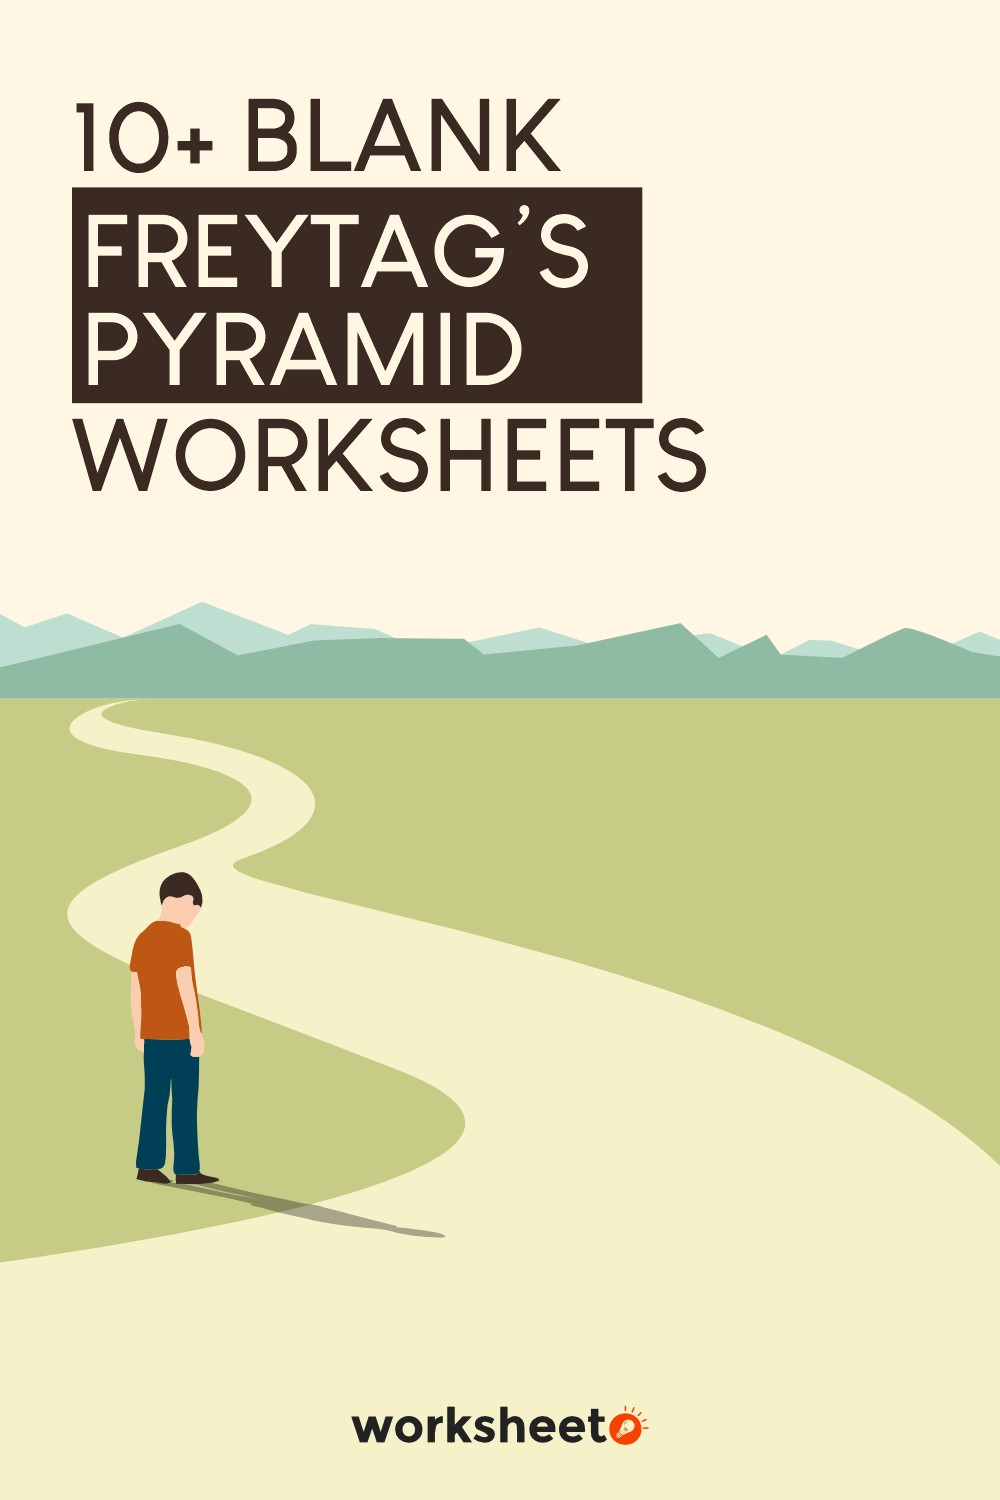 17 Images of Blank Freytags Pyramid Worksheets